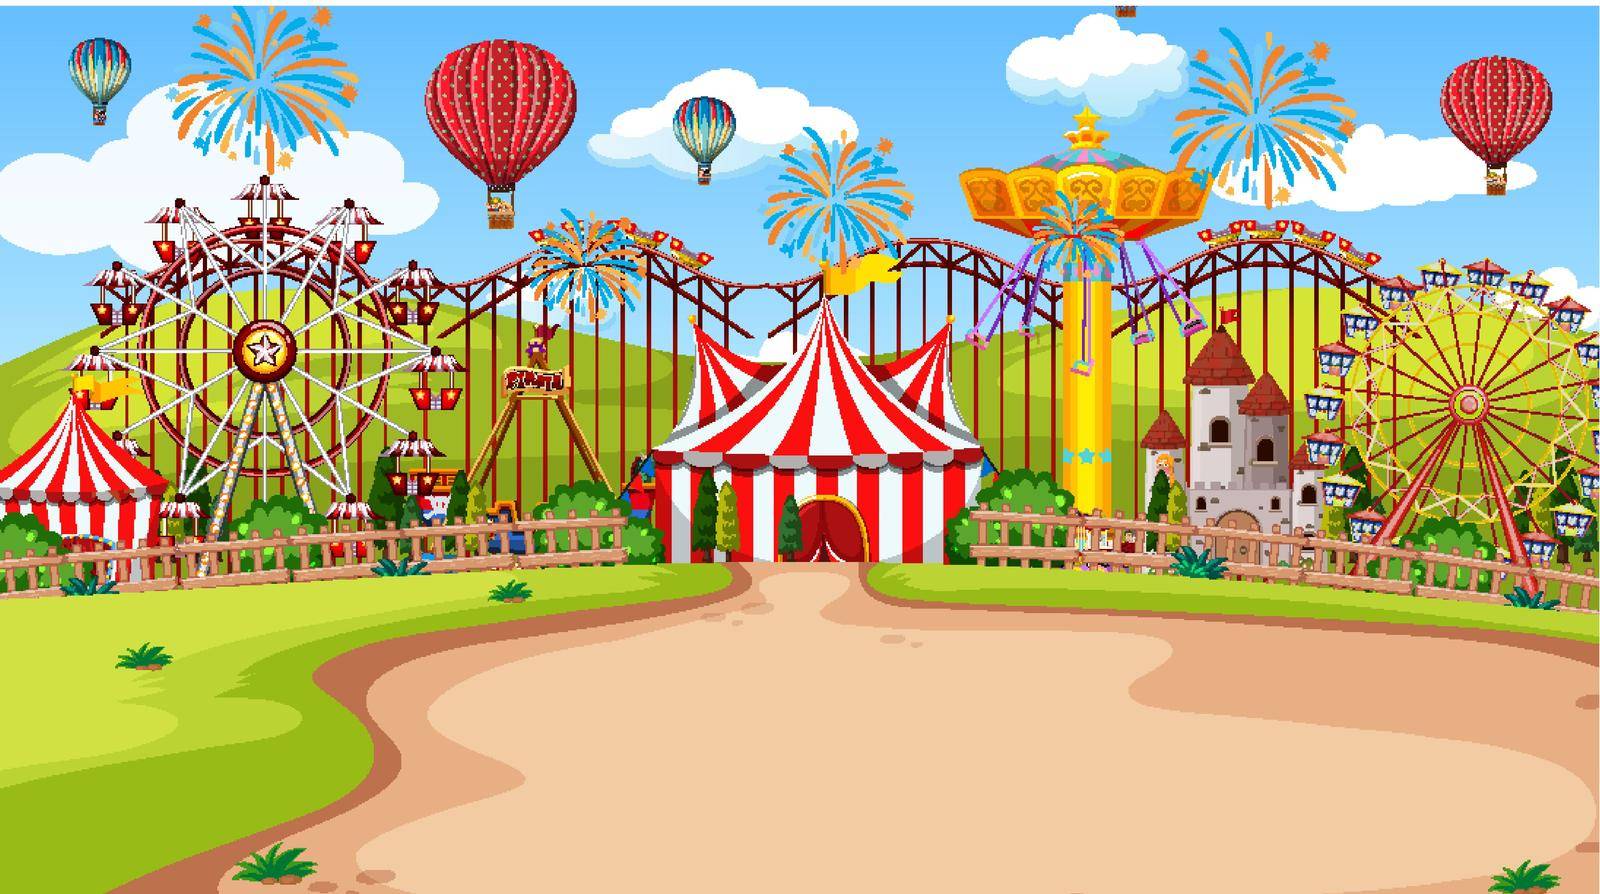 Themepark scene with many rides at day time illustration